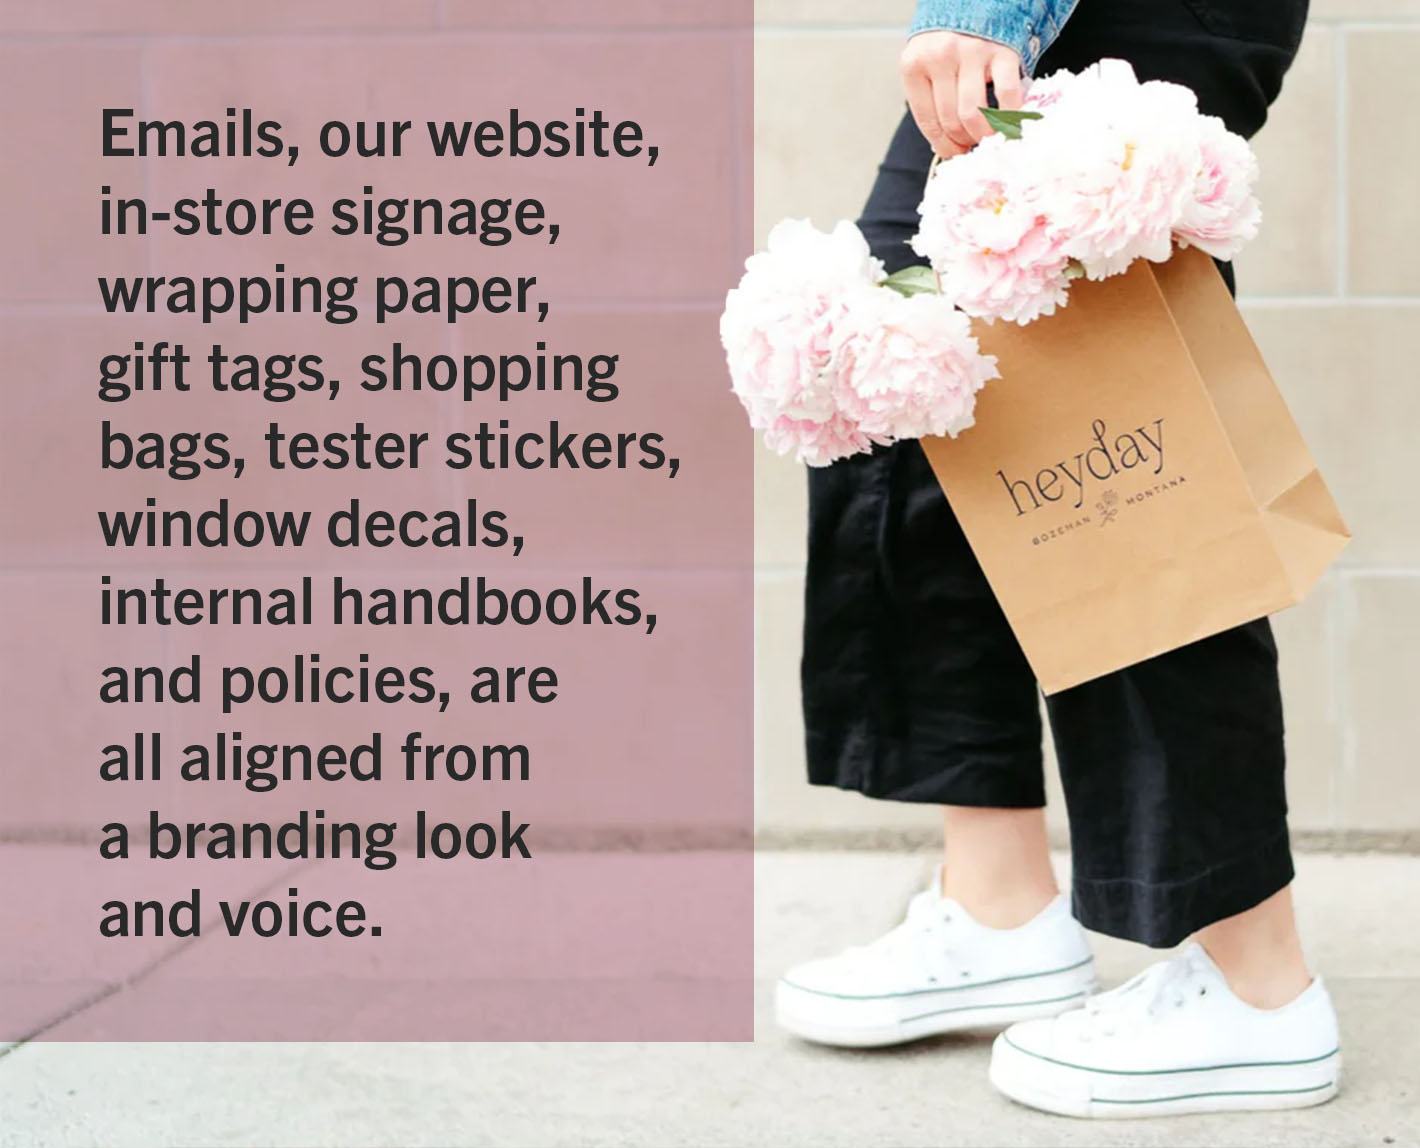 HeyDay - Emails, our website, in-store signage, wrapping paper, gift tags, shopping bags, tester stickers, window decals, internal handbooks, and policies, are all aligned from a branding look and voice